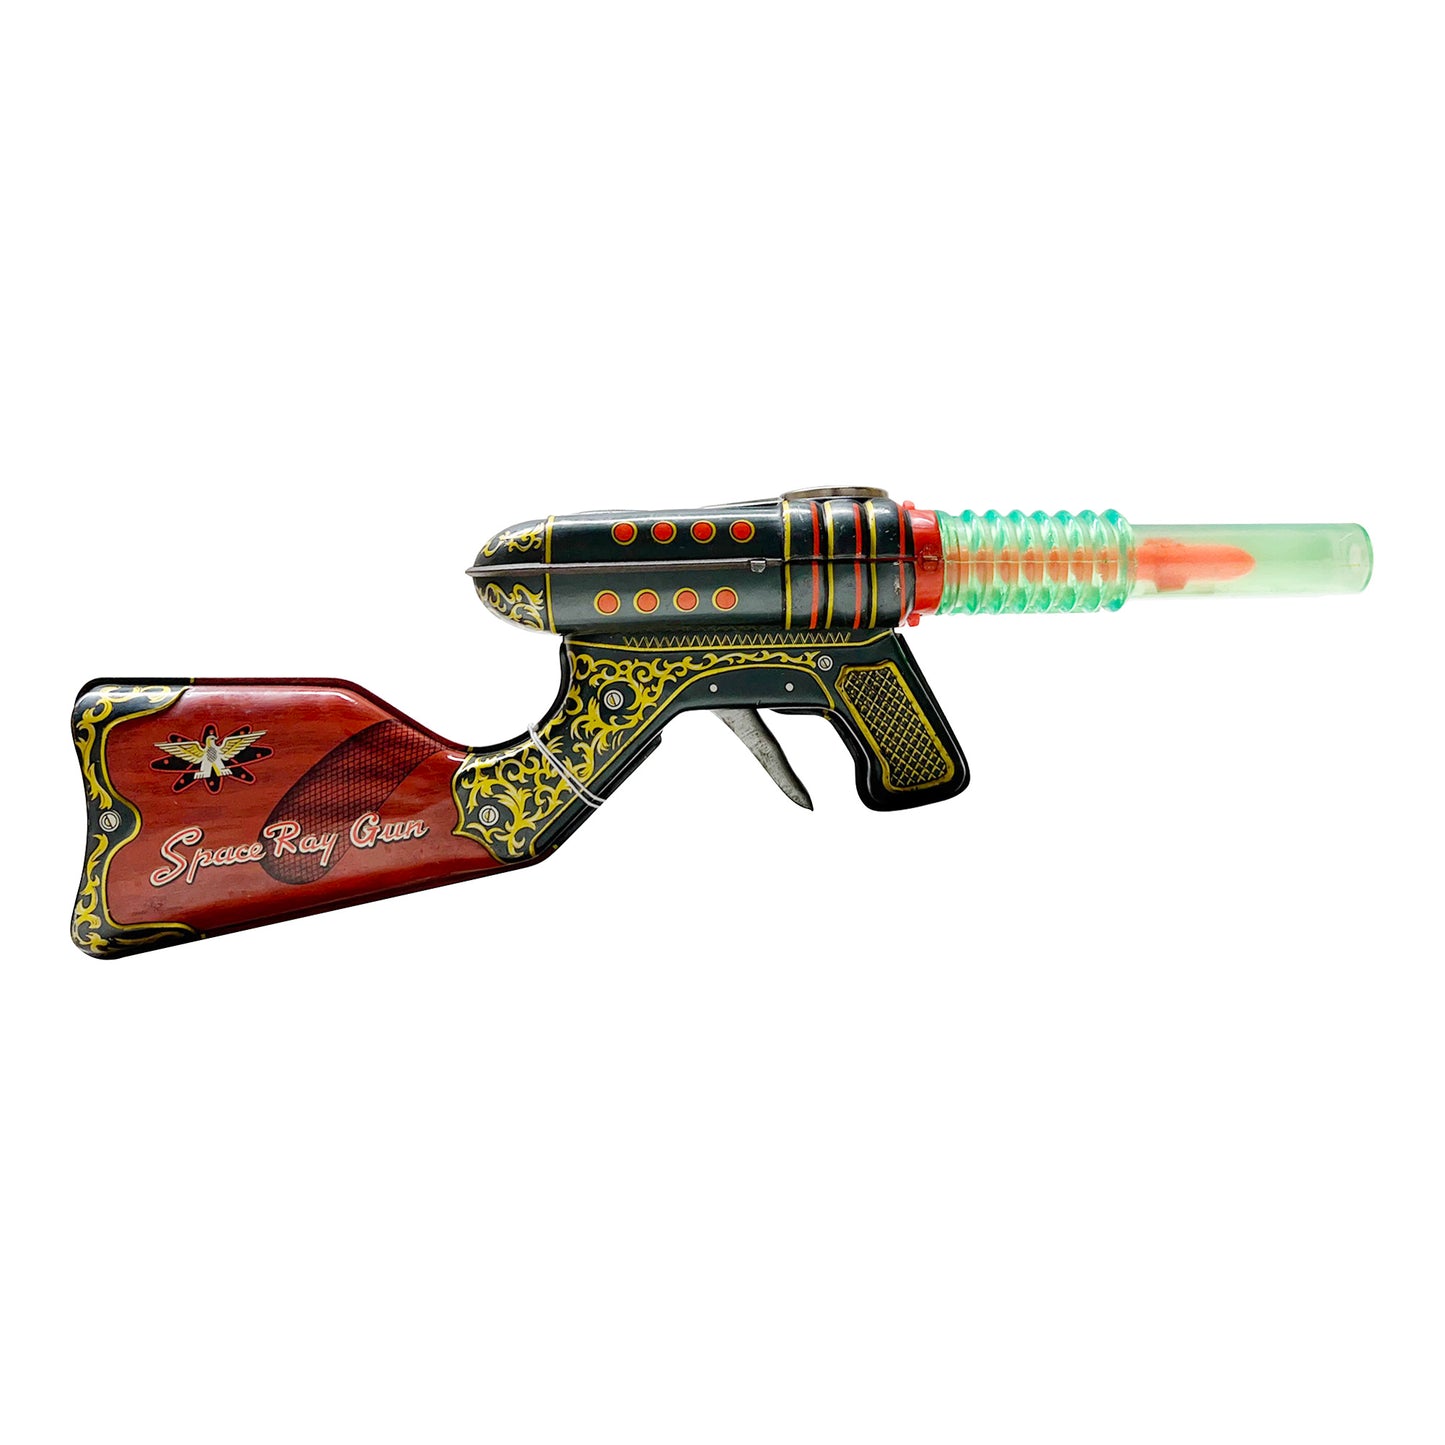 Double Barrel 1960 Space Ray Gun 14" Made in Japan